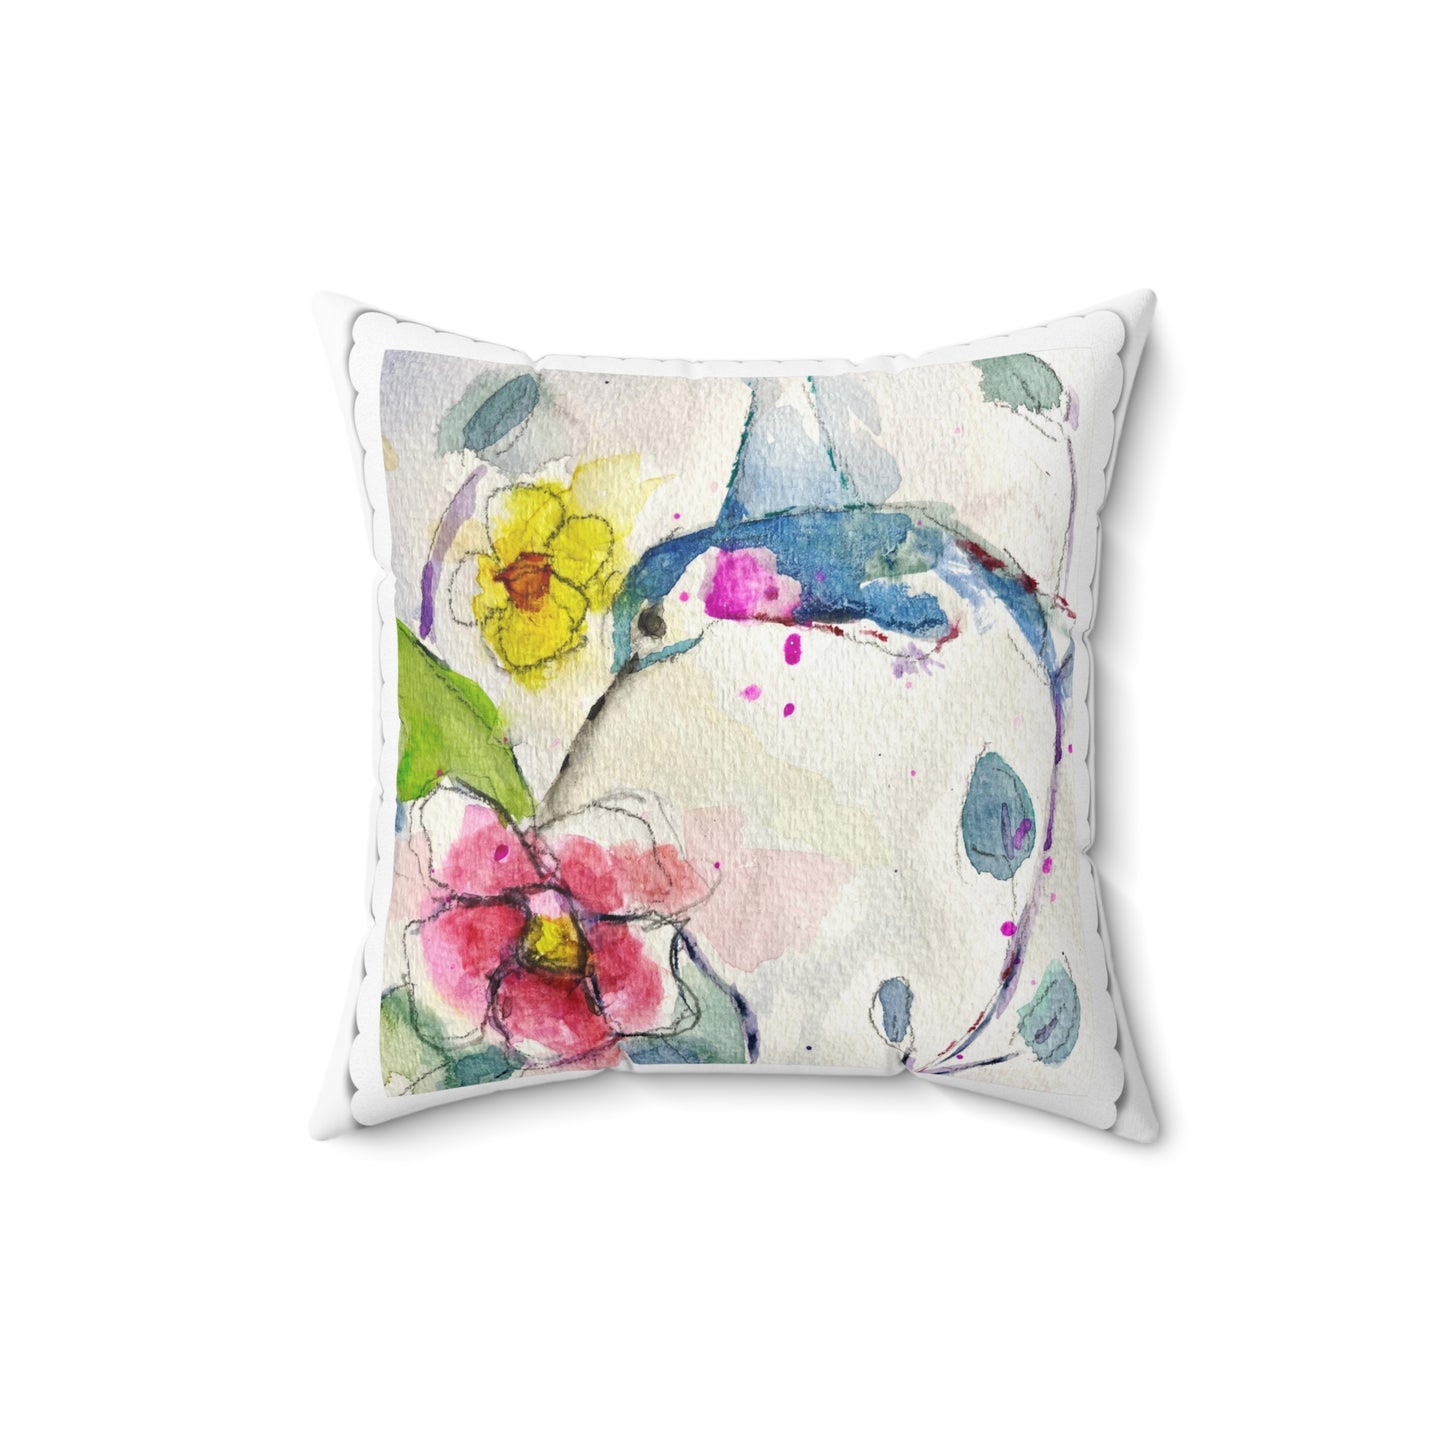 Floaty Loose Floral Hummingbird Indoor Spun Polyester Square Pillow